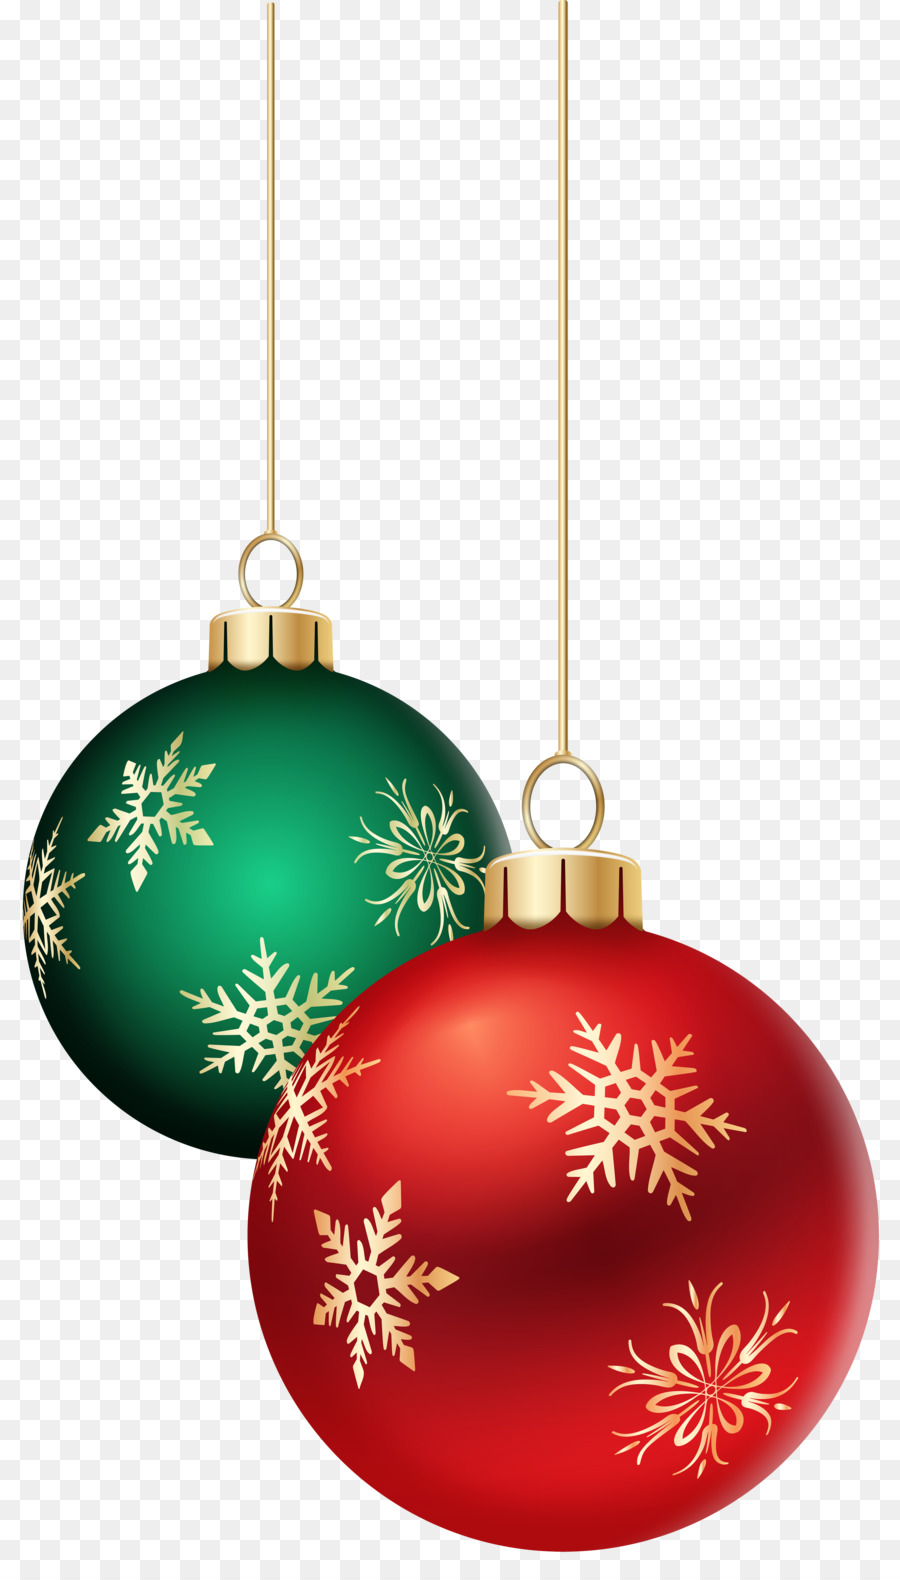 Clip art Christmas ornament Portable Network Graphics Image Transparency - silver christmas balls png download - 4587*8000 - Free Transparent Christmas Ornament png Download.